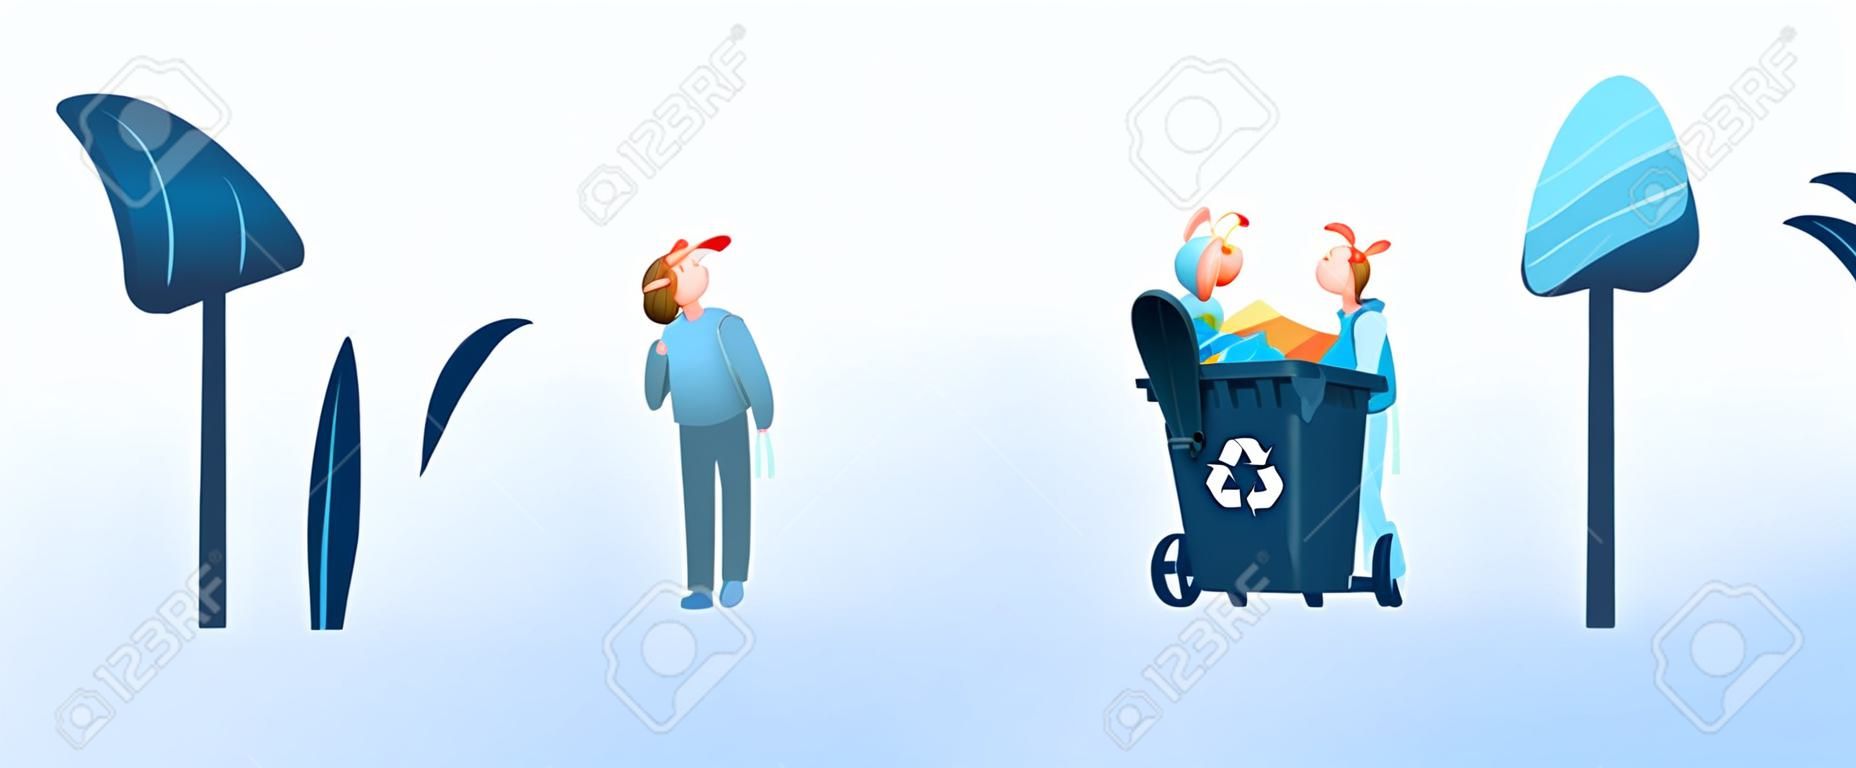 Group of People City Dwellers Throw Garbage to Recycle Litter Bins for Plastic, Paper and Organic Waste. Environmental